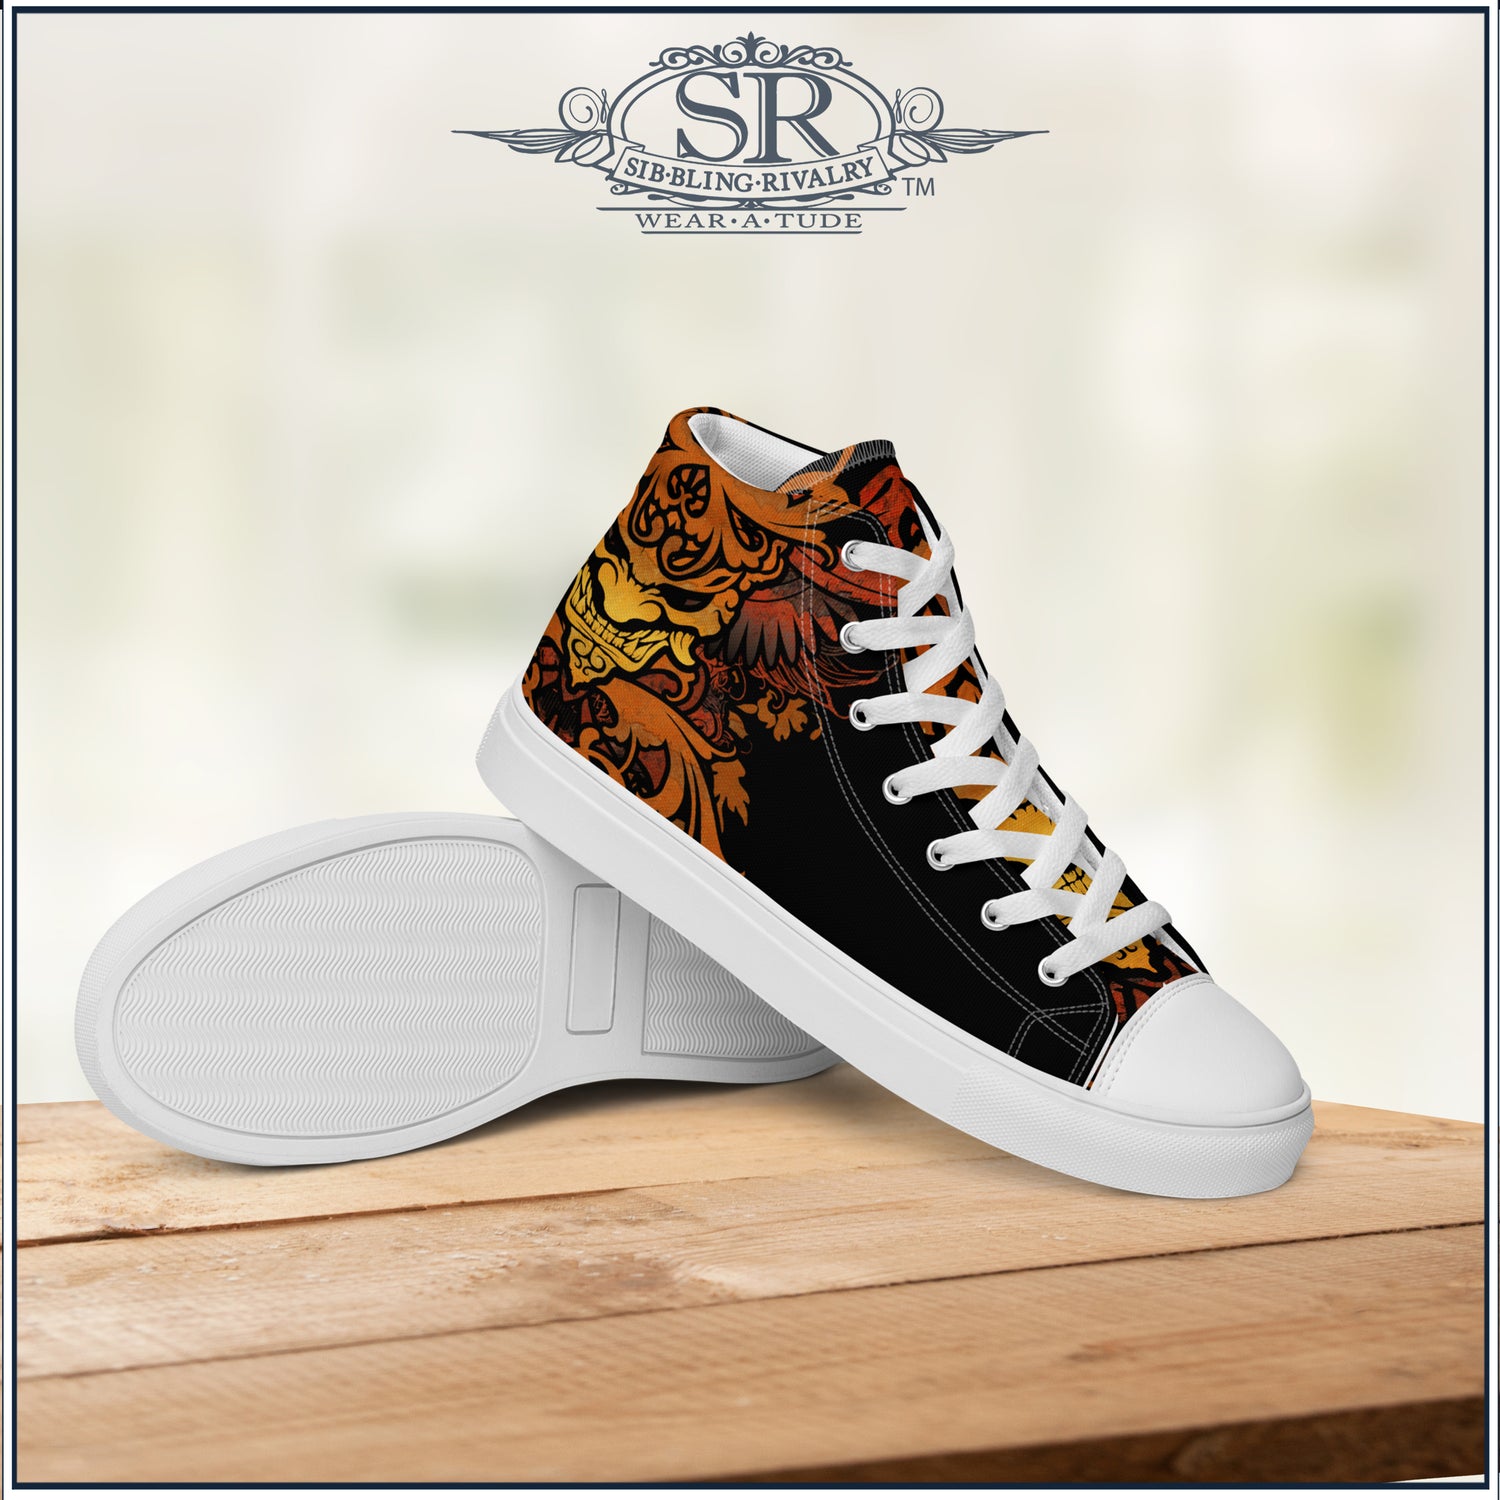 Crossroads demon high tops for the blues player by SR Wear Atude, Sib.Bling Rivalry Design. A product by The Joubert Sisters . Brilliant bold demon art on canvas hightop sneakers